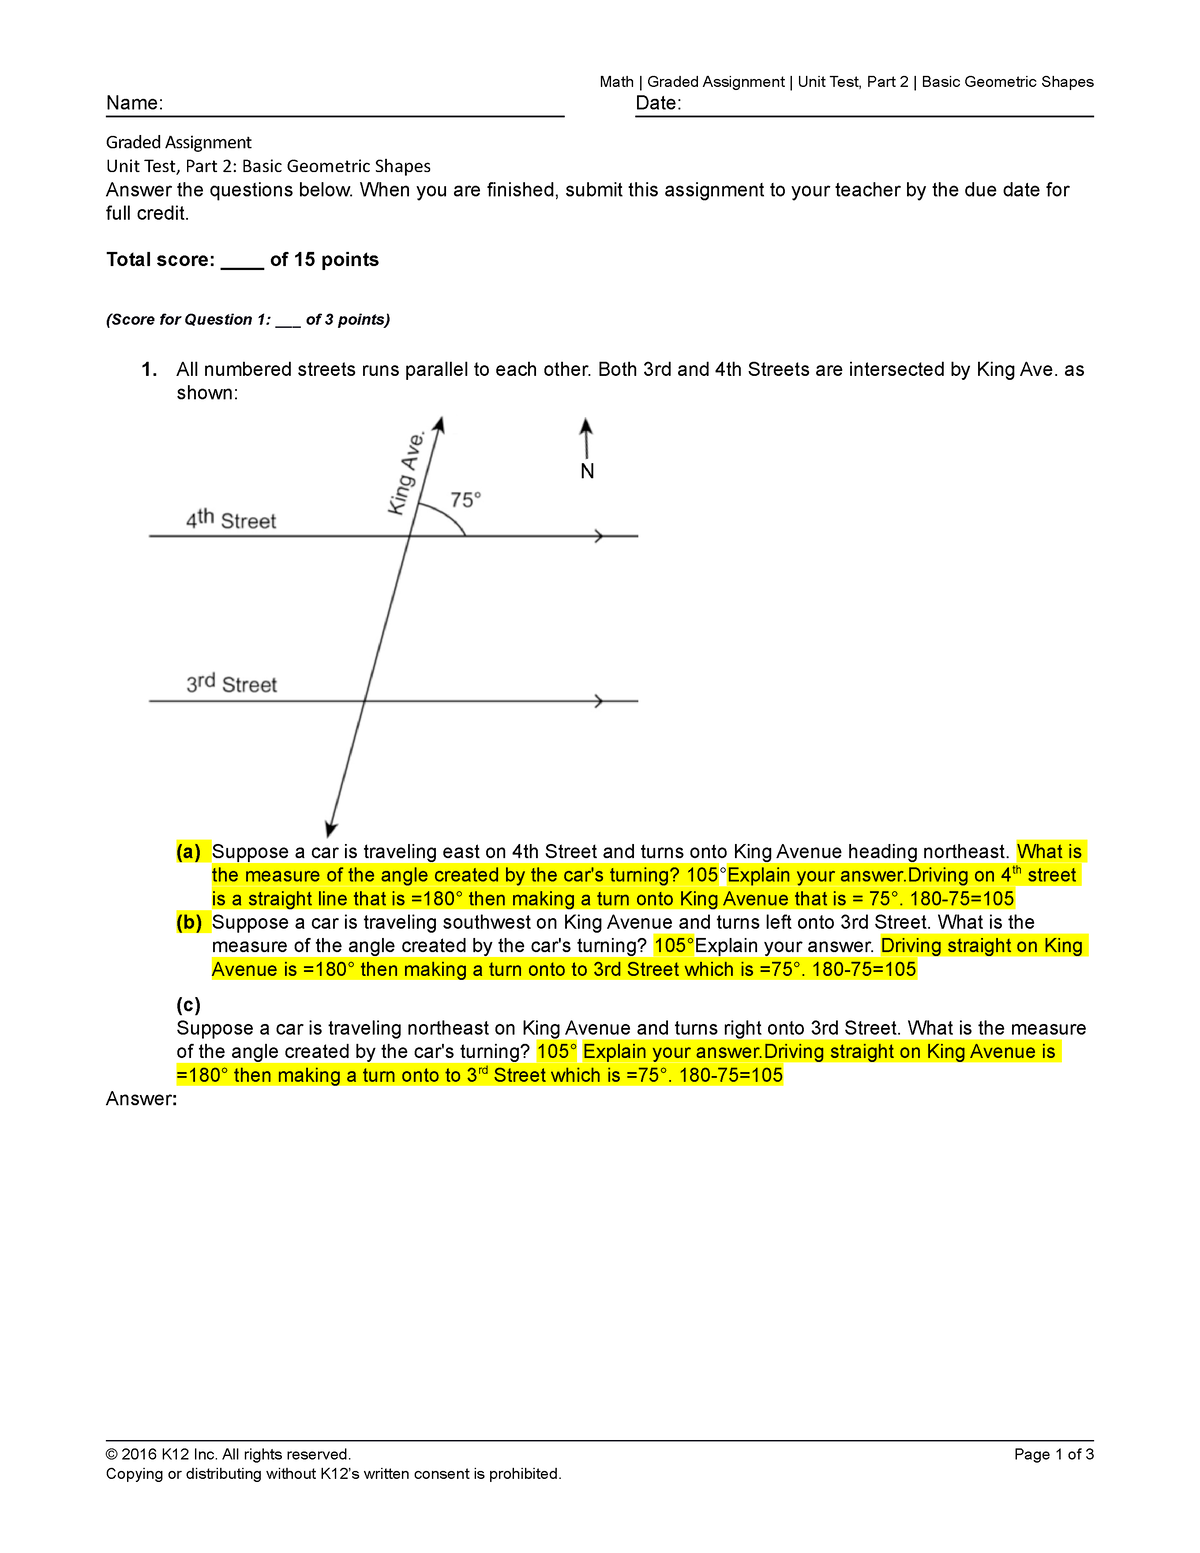 math graded assignment unit test part 2 reasoning and proof